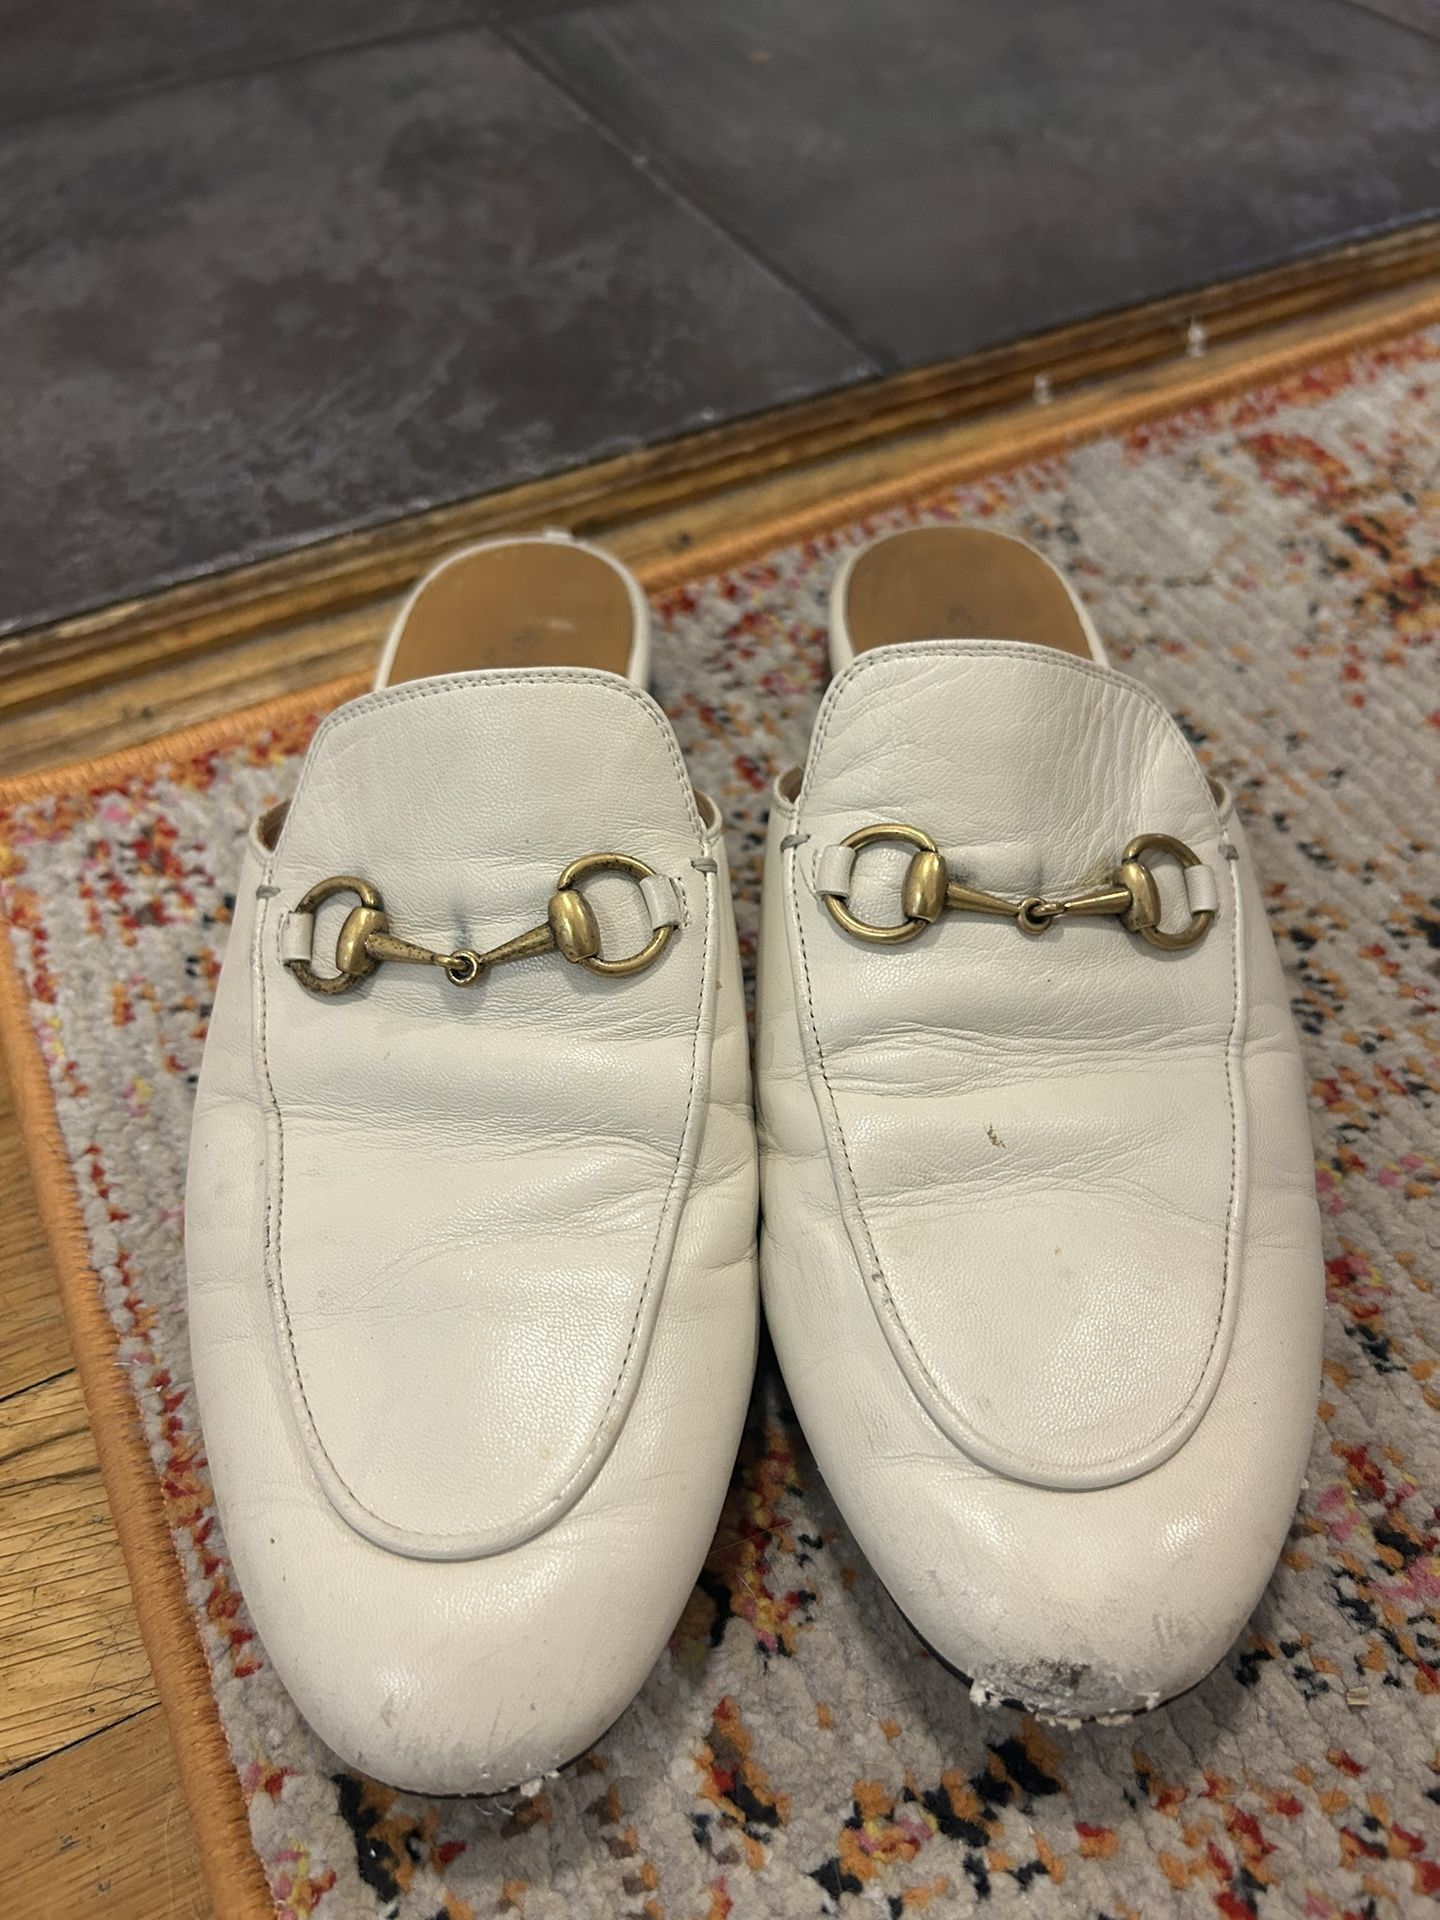 White Gucci Loafers